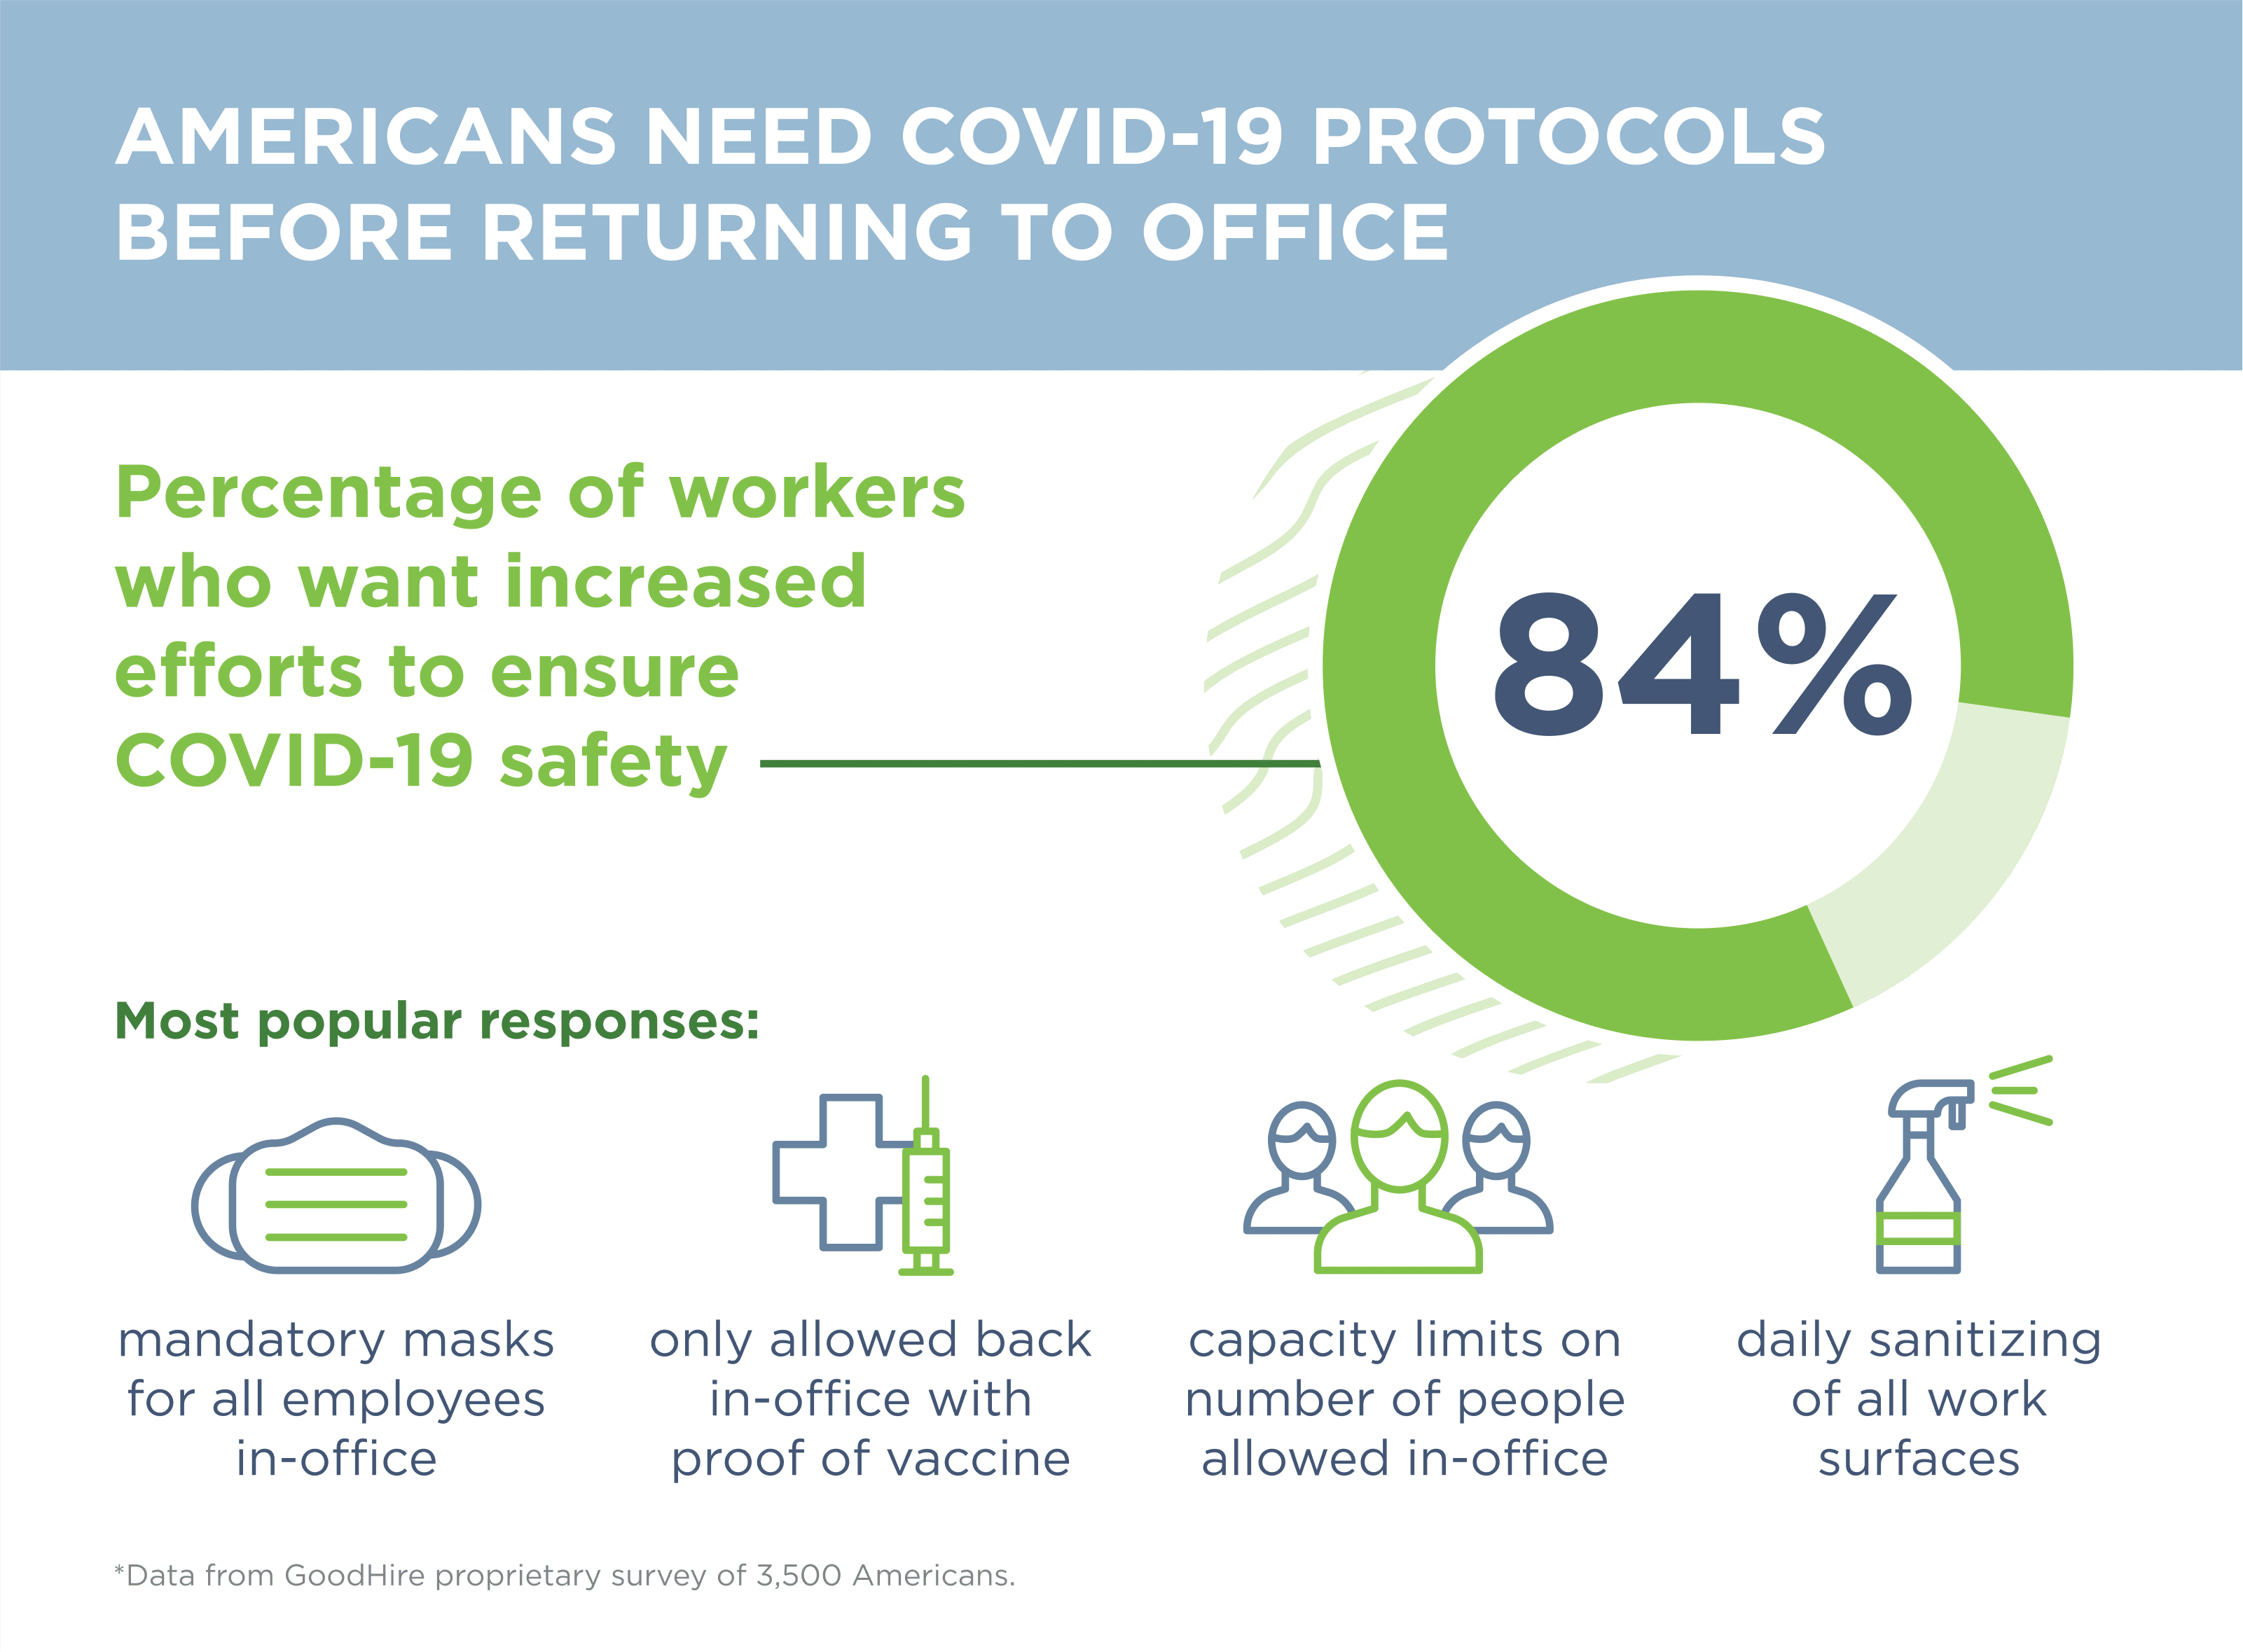 Graph shows 84% of workers want increased efforts to ensure Covid safety.